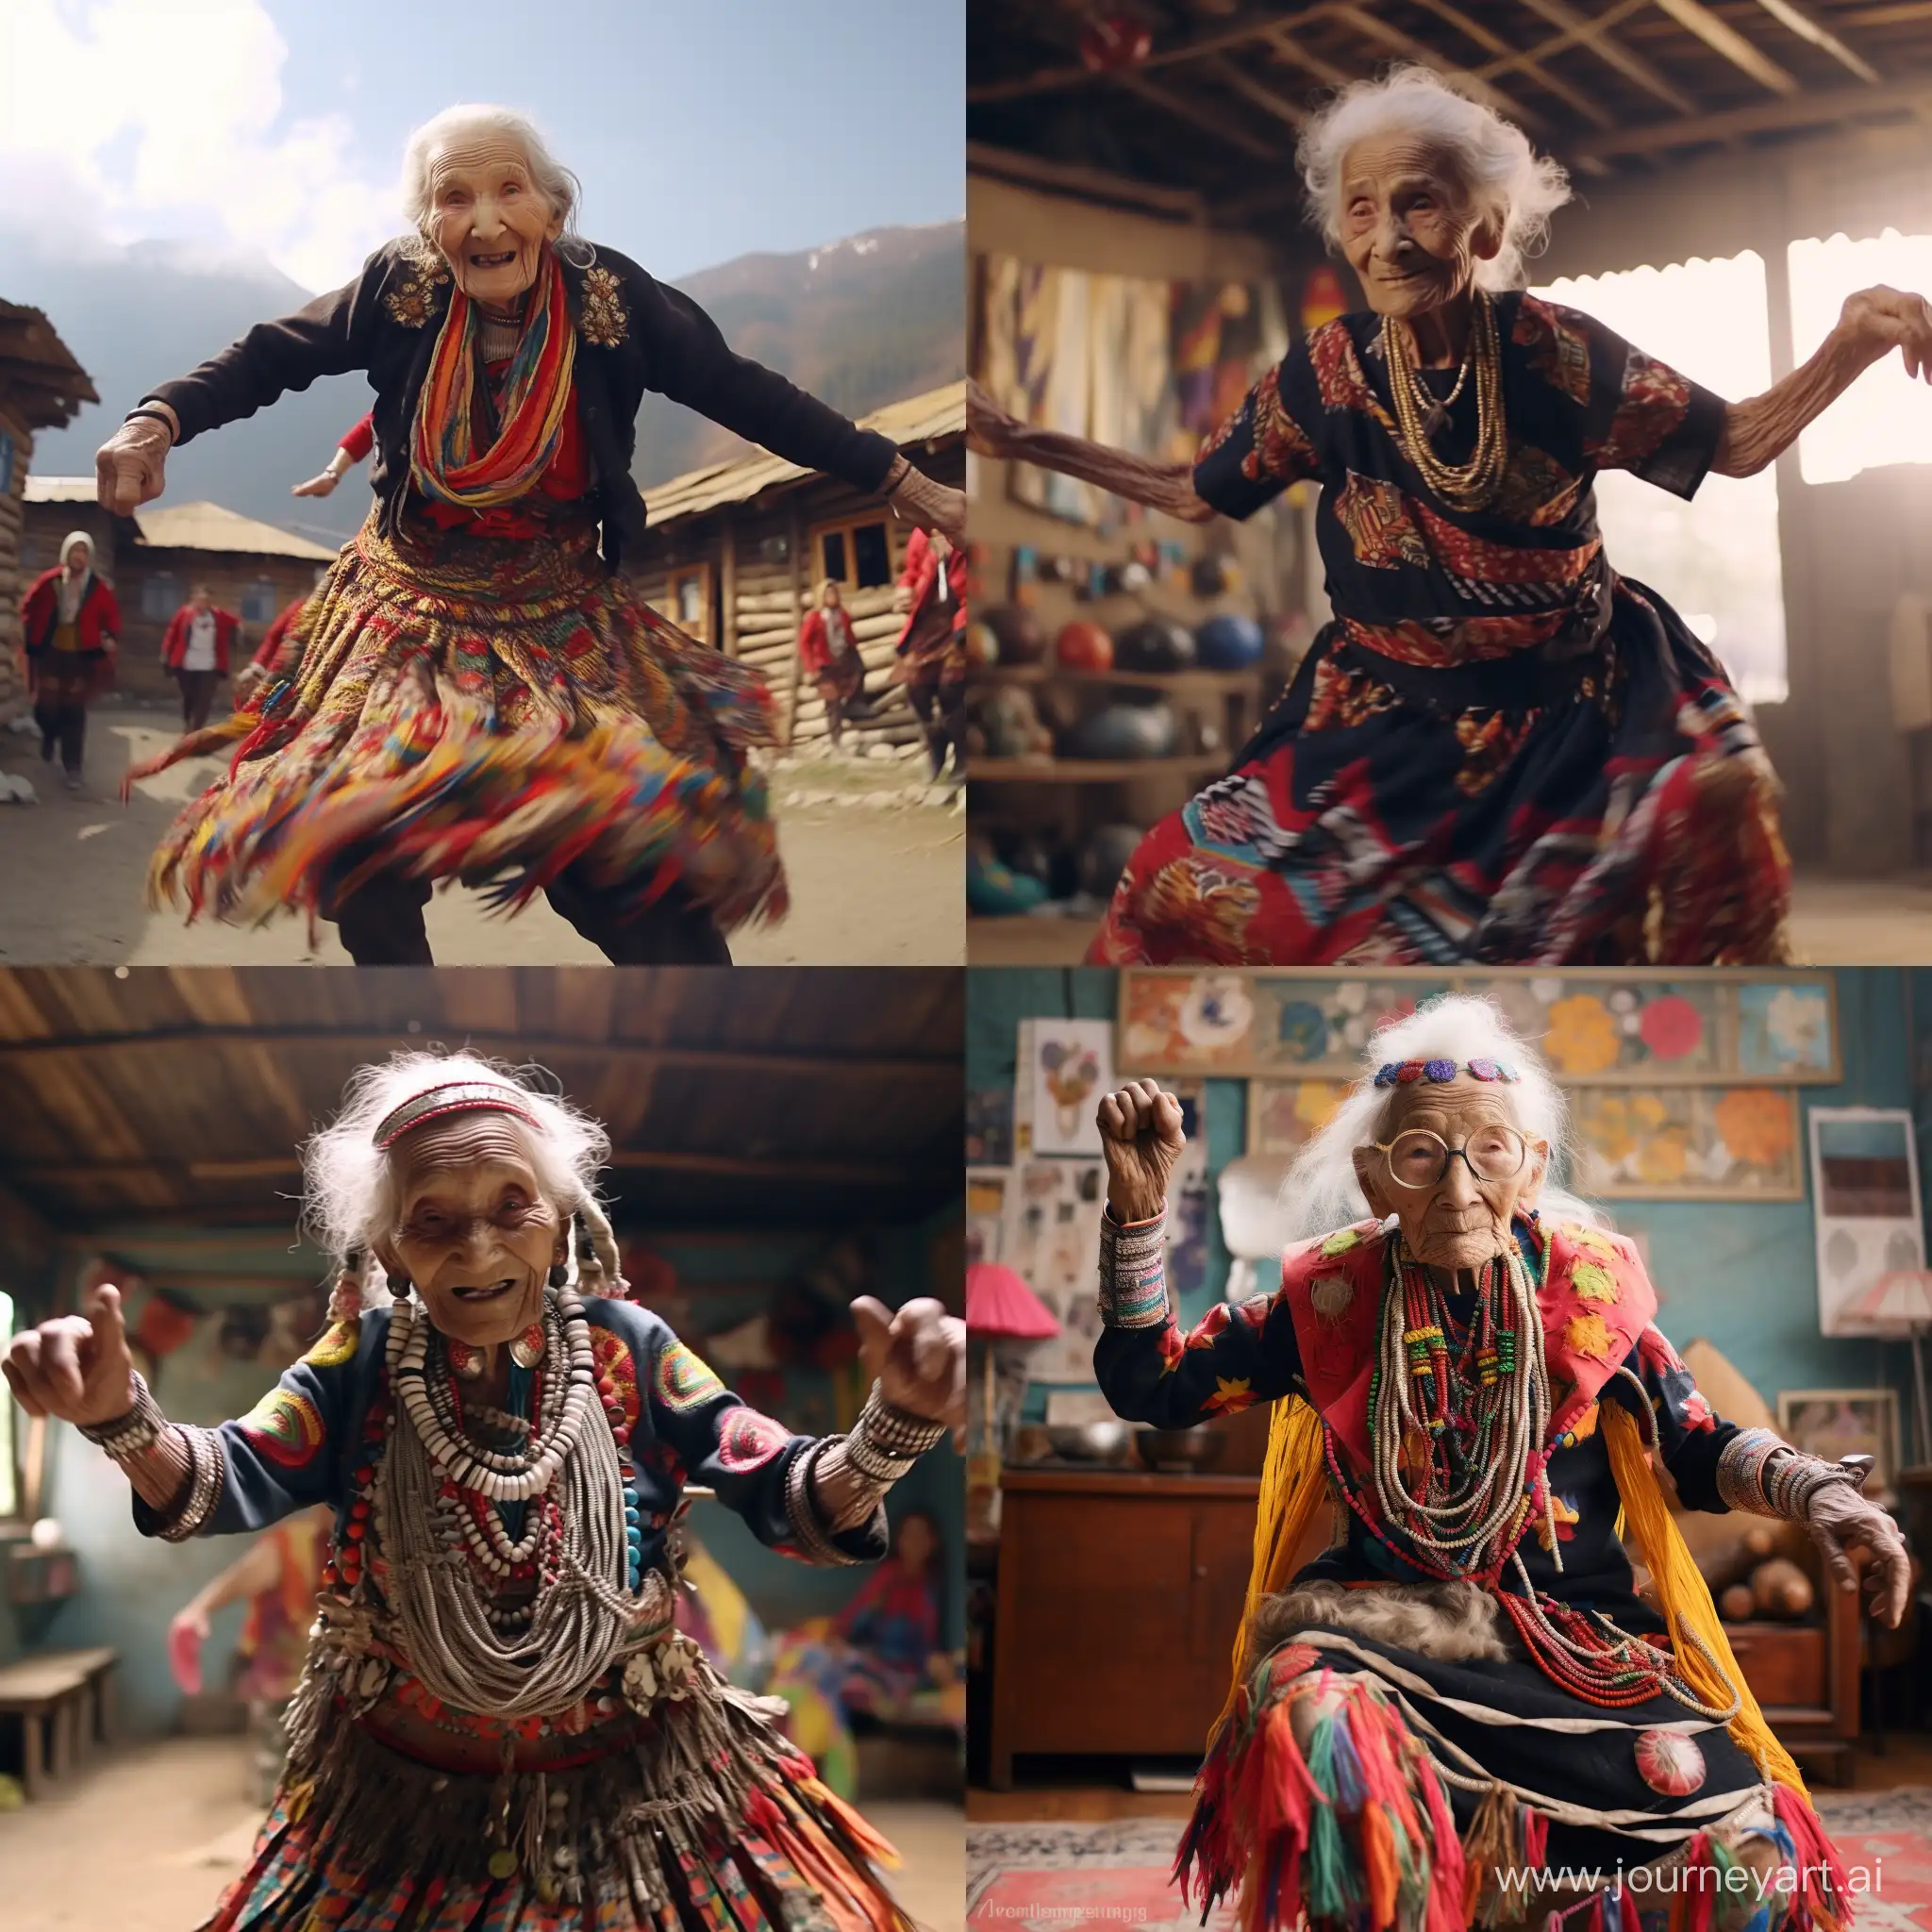 Elderly-Dancing-Oldest-Woman-in-the-World